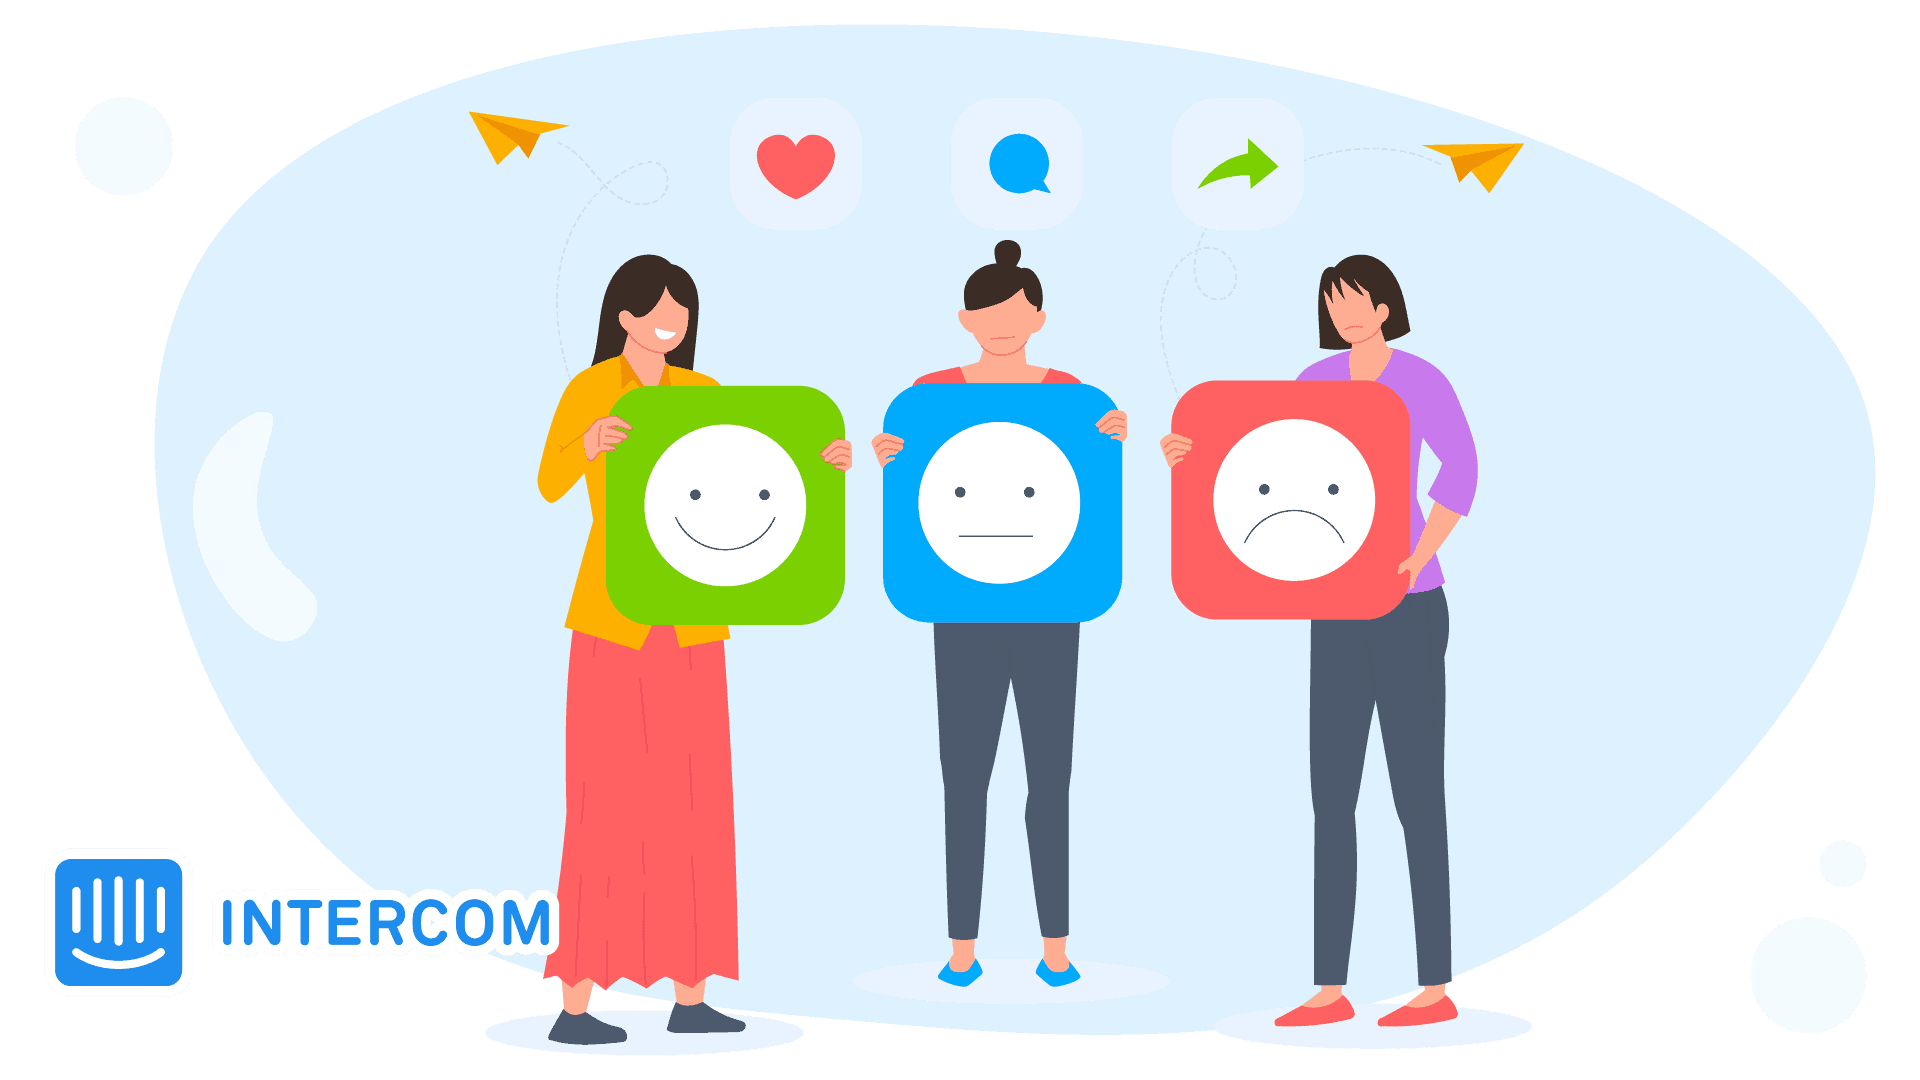 Intercom vs zendesk, Intercom vs Zendesk vs Messenger Bot, Comparisons, Chatbot, Support, Customer experience, Self-service, Features and benefits